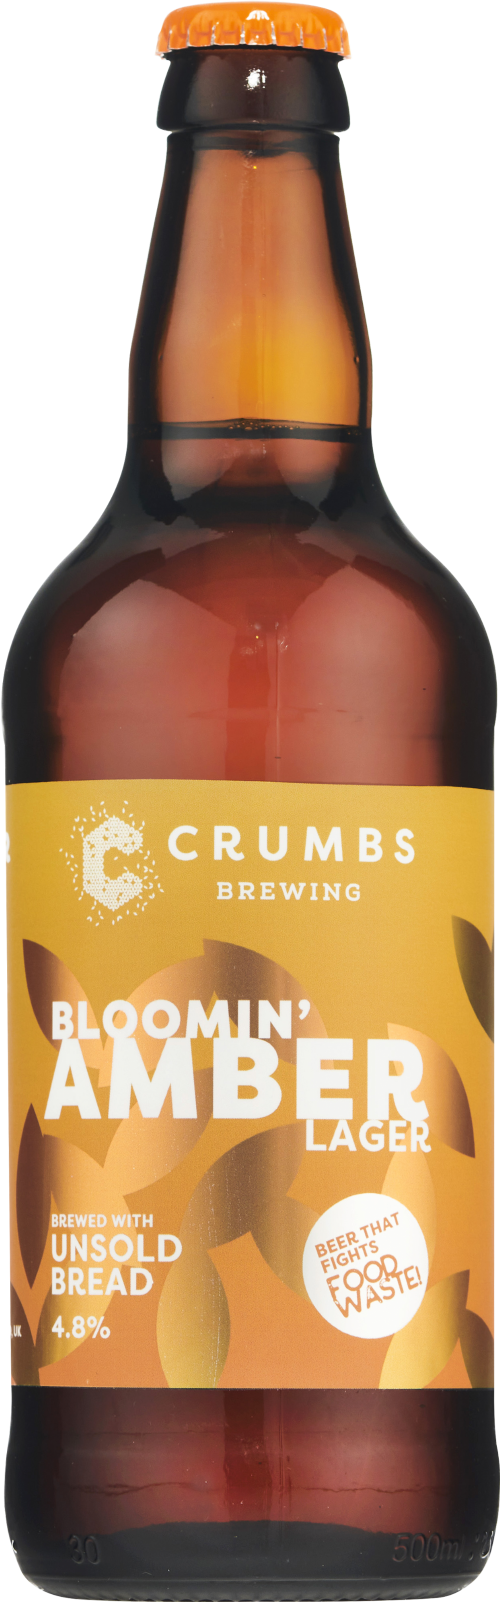 CRUMBS BREWING Bloomin' Amber Lager 4.8% ABV 500ml